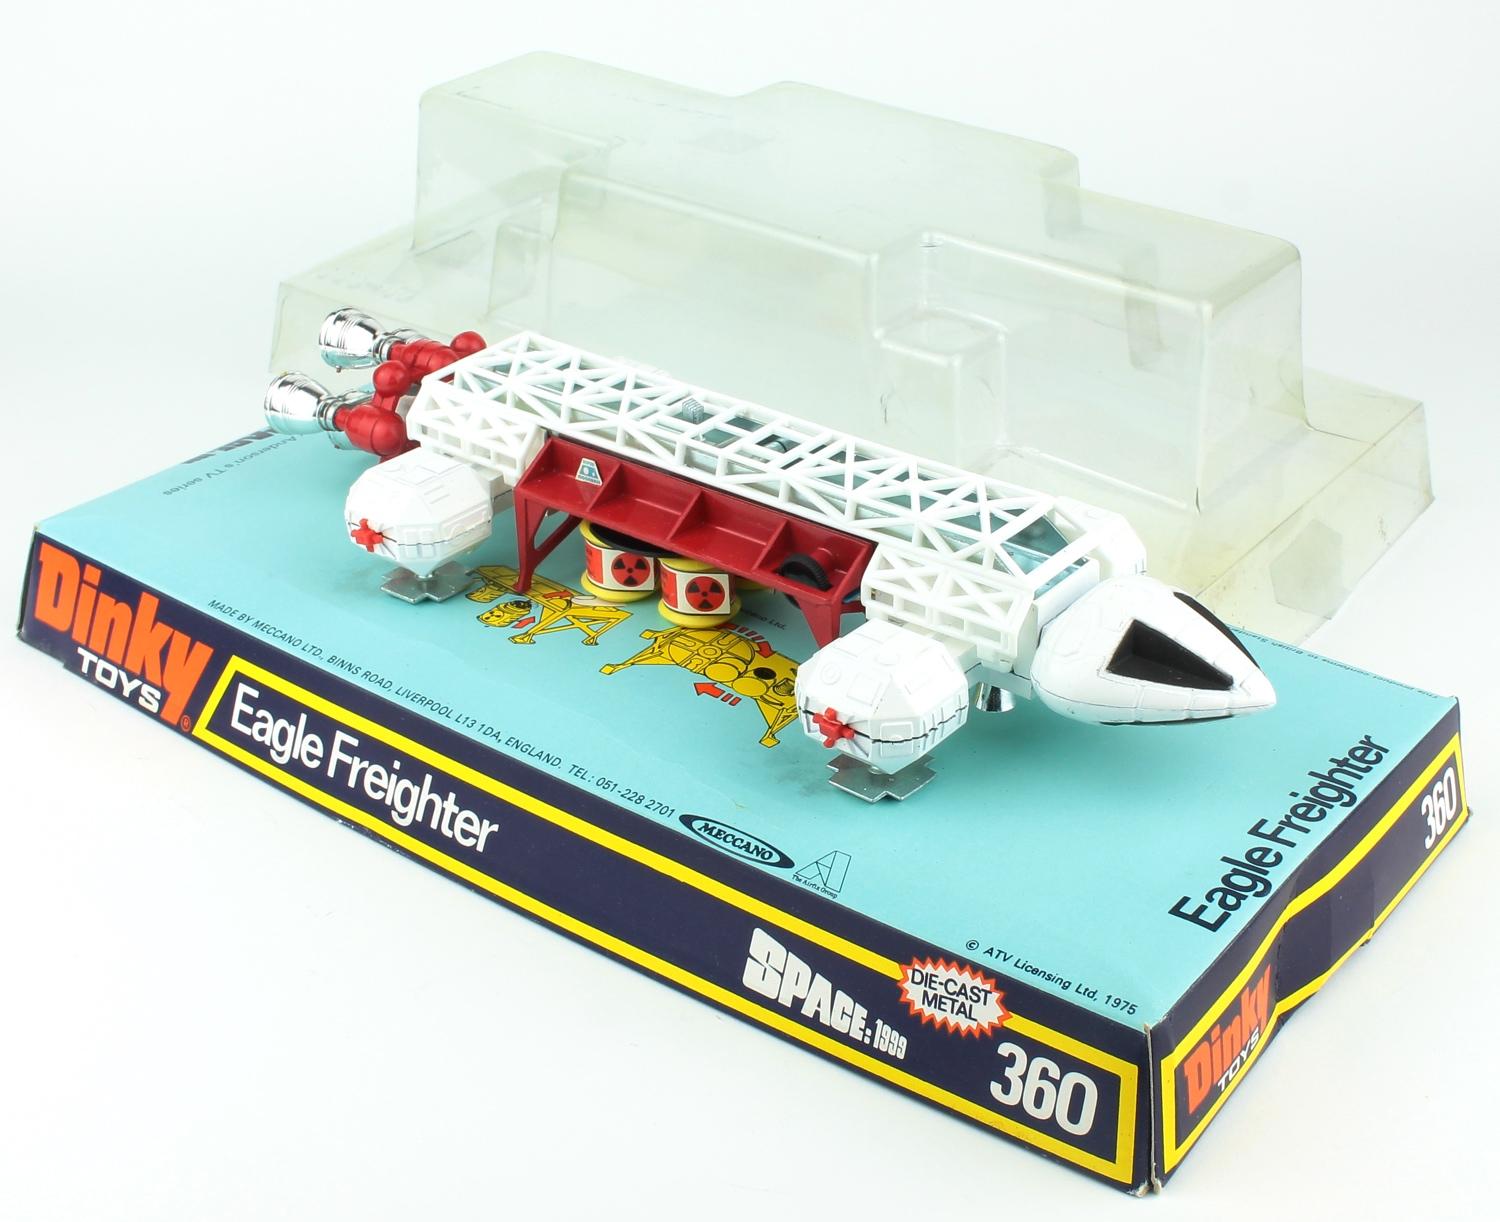 Space 1999 Dinky Eagle Freighter 360 Replacement Barrel Stickers